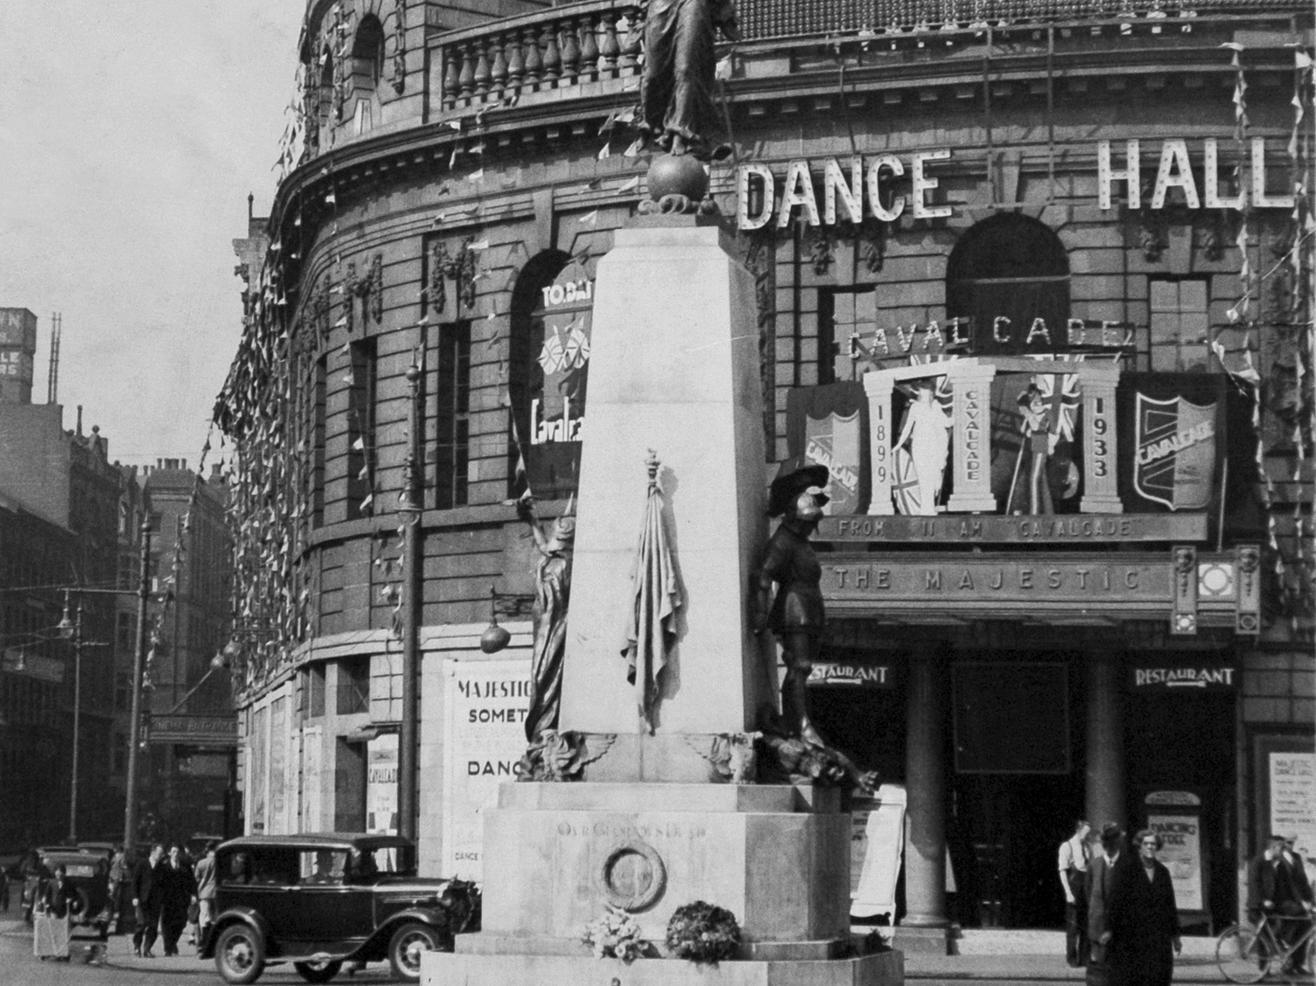 Pictured is the Leeds War memorial as it stood prior to it's move to The Headrow early in 1937. In the background is the Majestic Dance Hall.